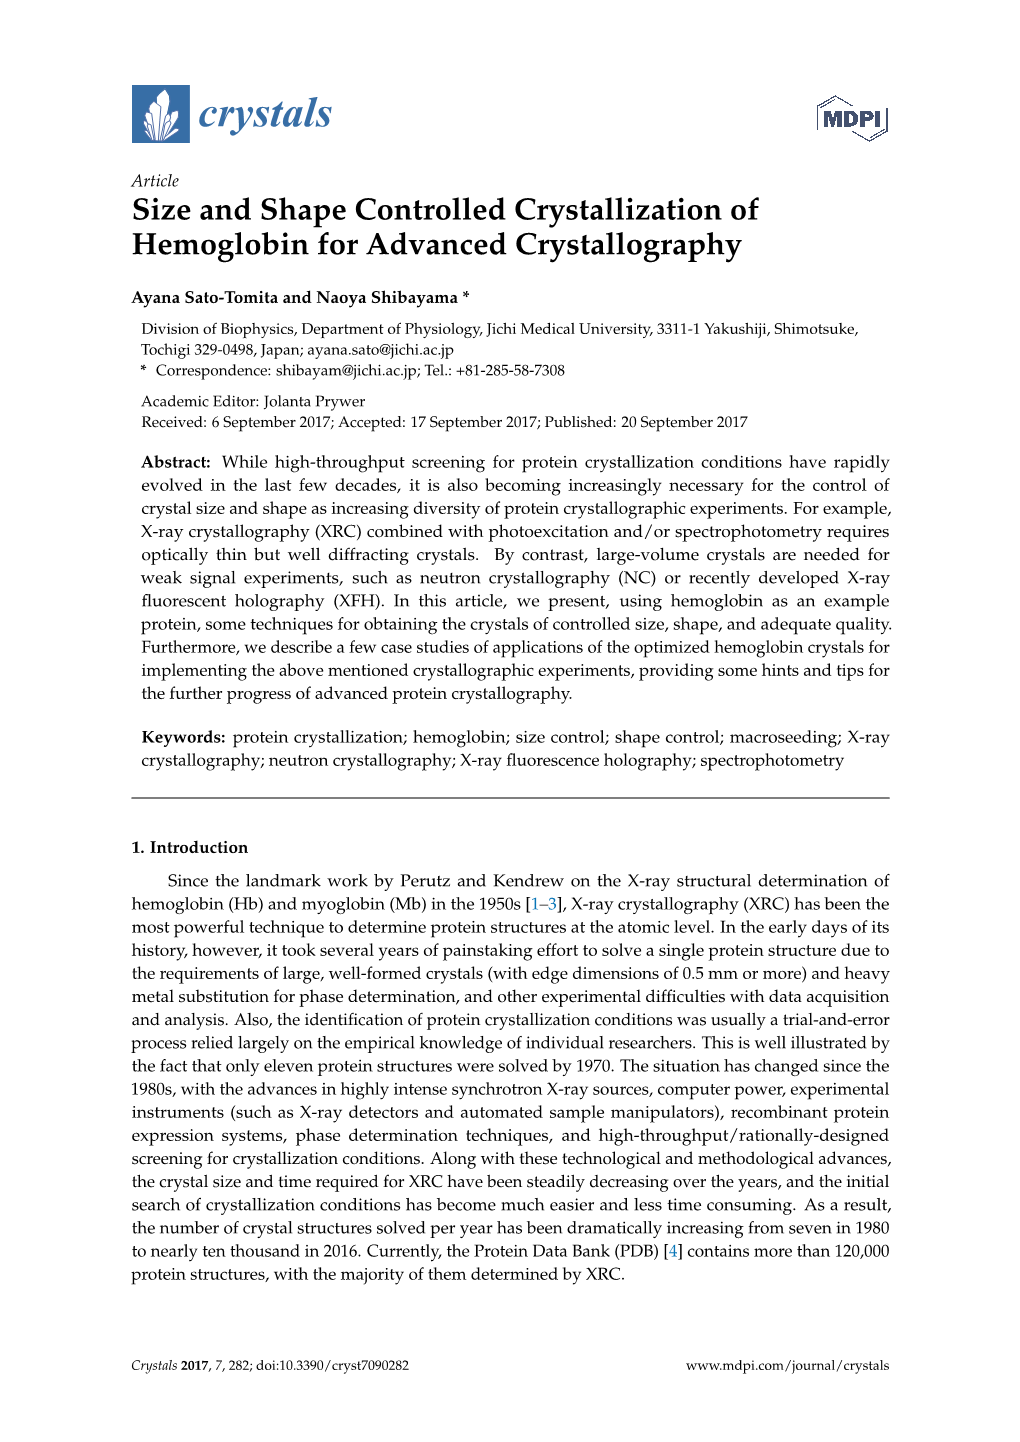 Size and Shape Controlled Crystallization of Hemoglobin for Advanced Crystallography